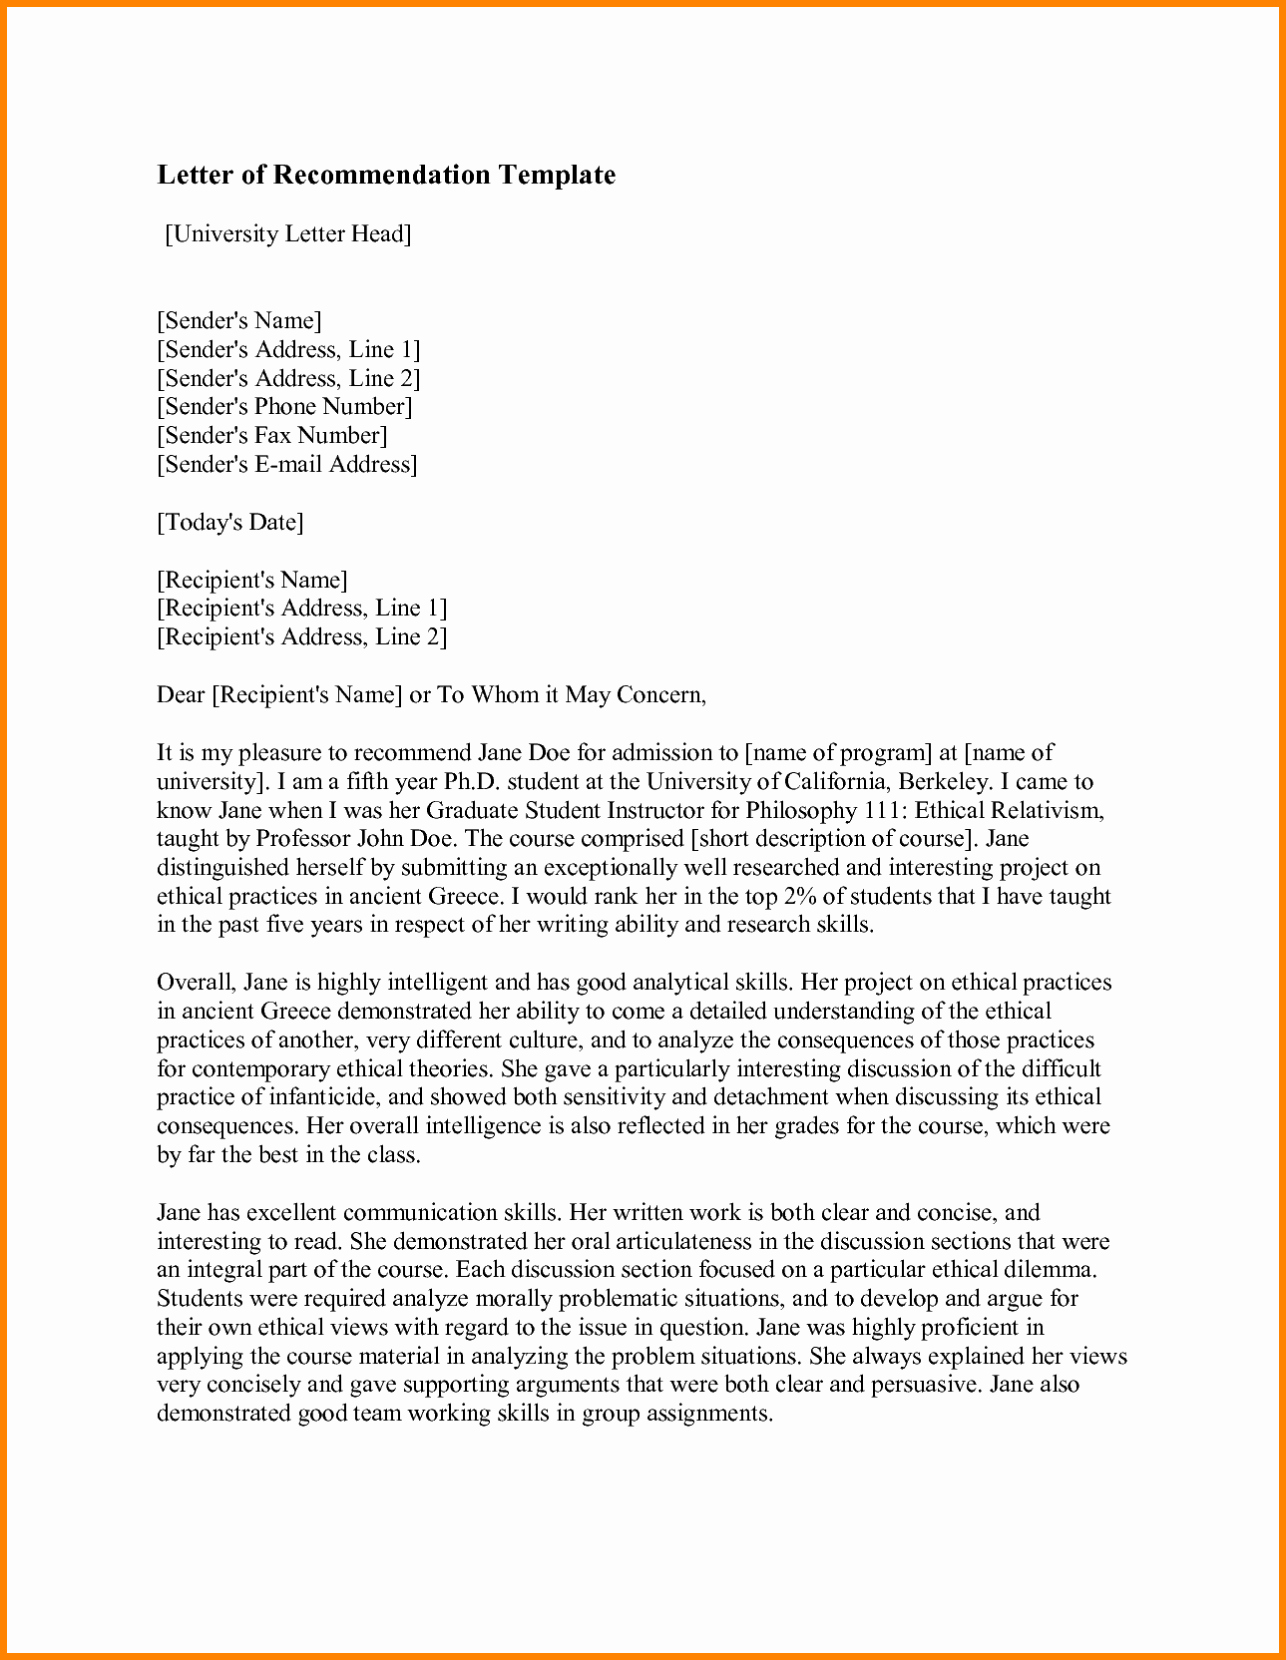 Pa Letter Of Recommendation Example Lovely Writing A Letter Of Re Mendation Template Sample